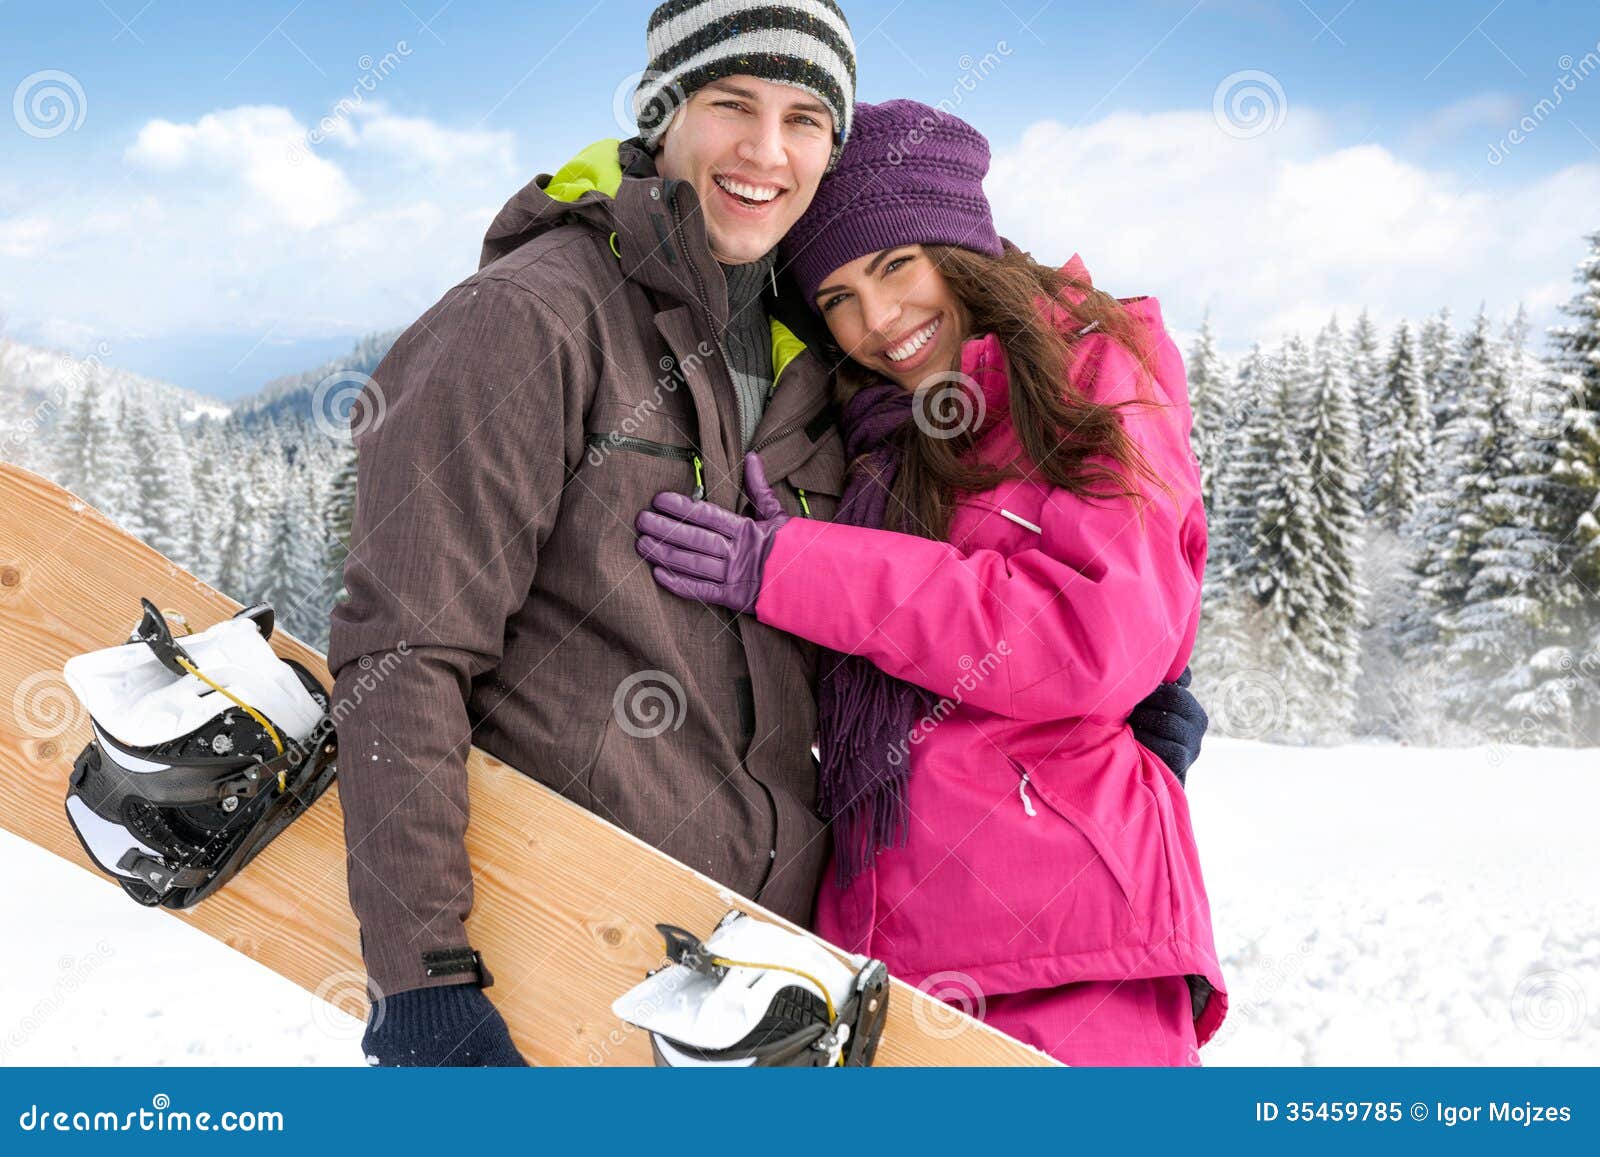 affectionate couple on winter holiday